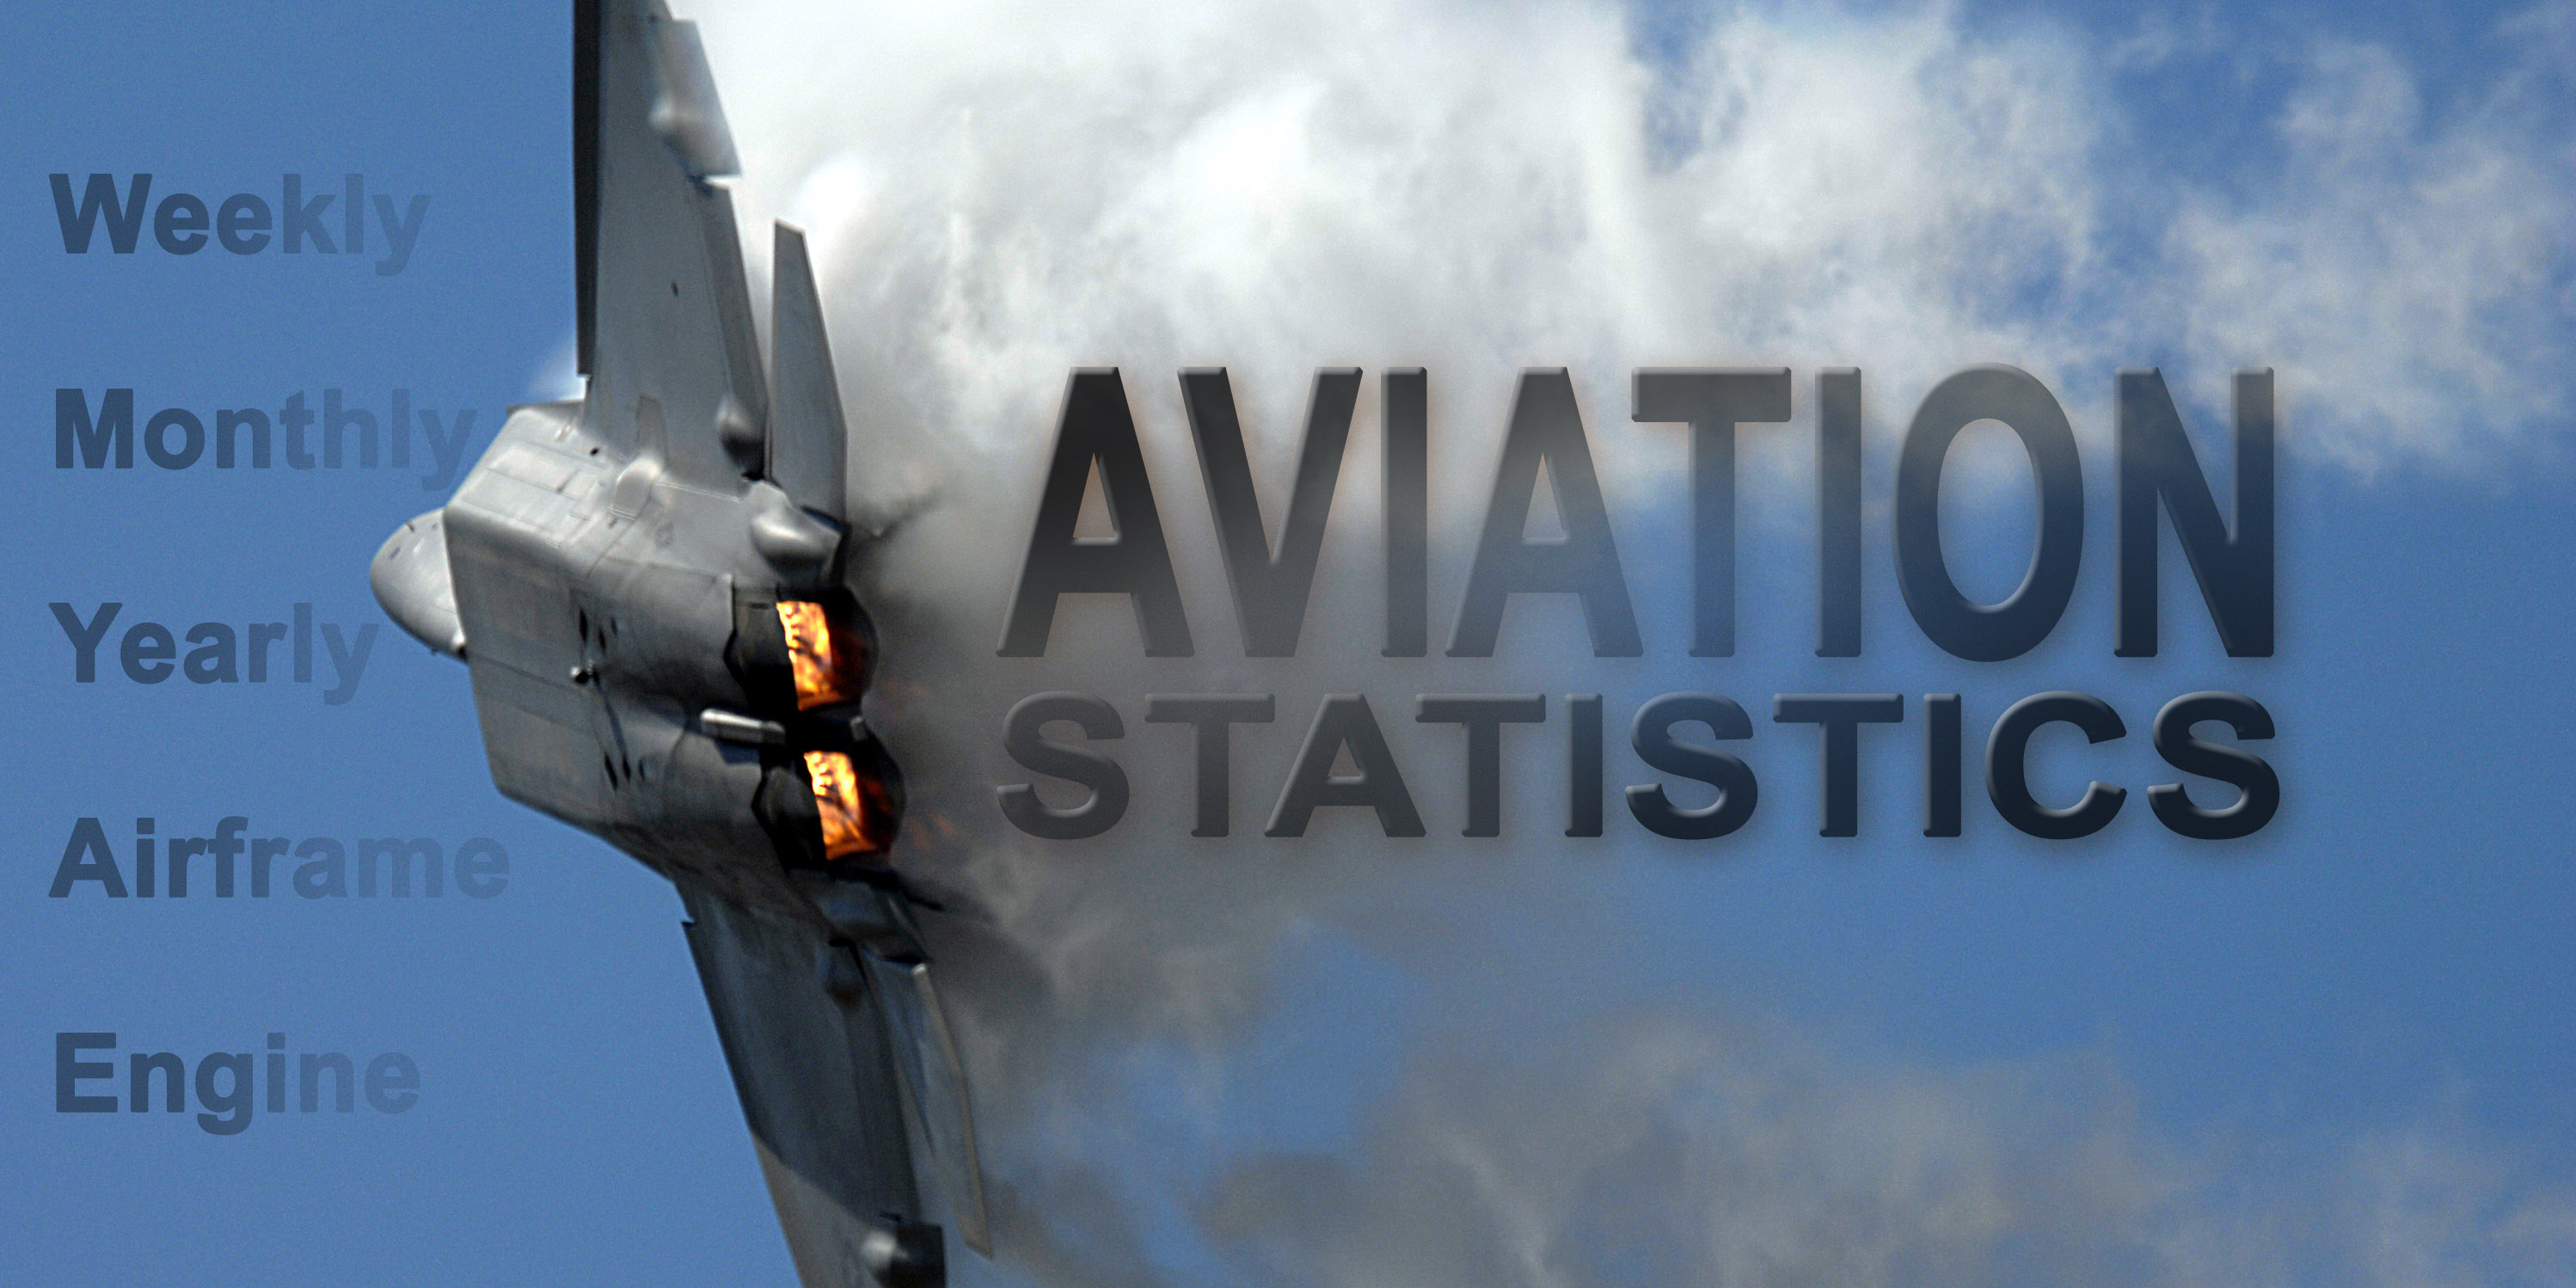 Click for link to Aviation Statistics page